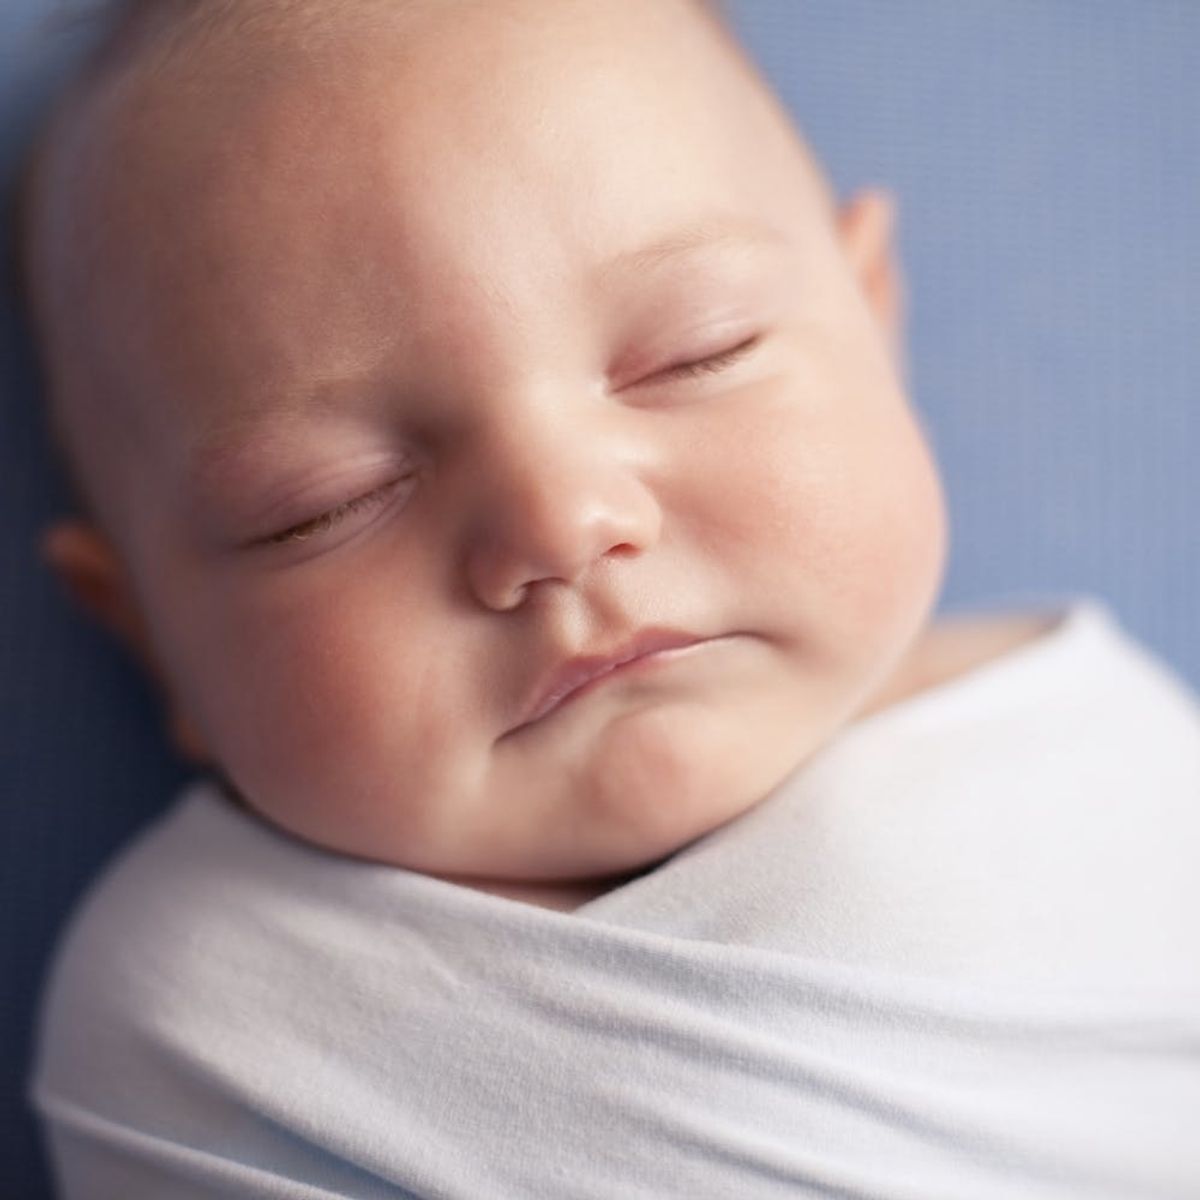 Swaddling Babies May Be a Contributing Factor in SIDS